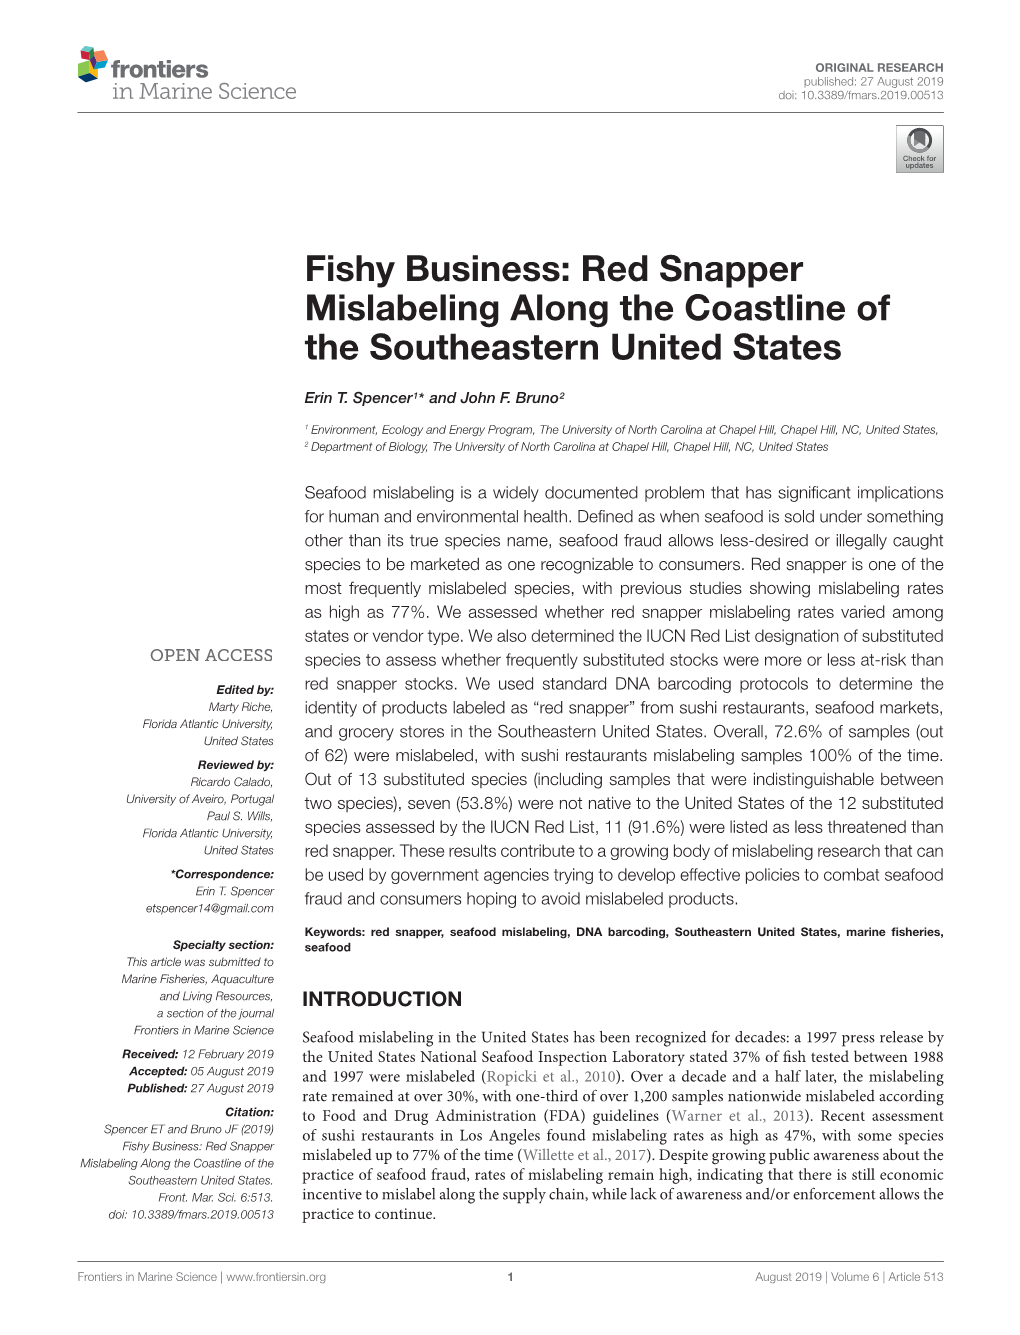 Red Snapper Mislabeling Along the Coastline of the Southeastern United States